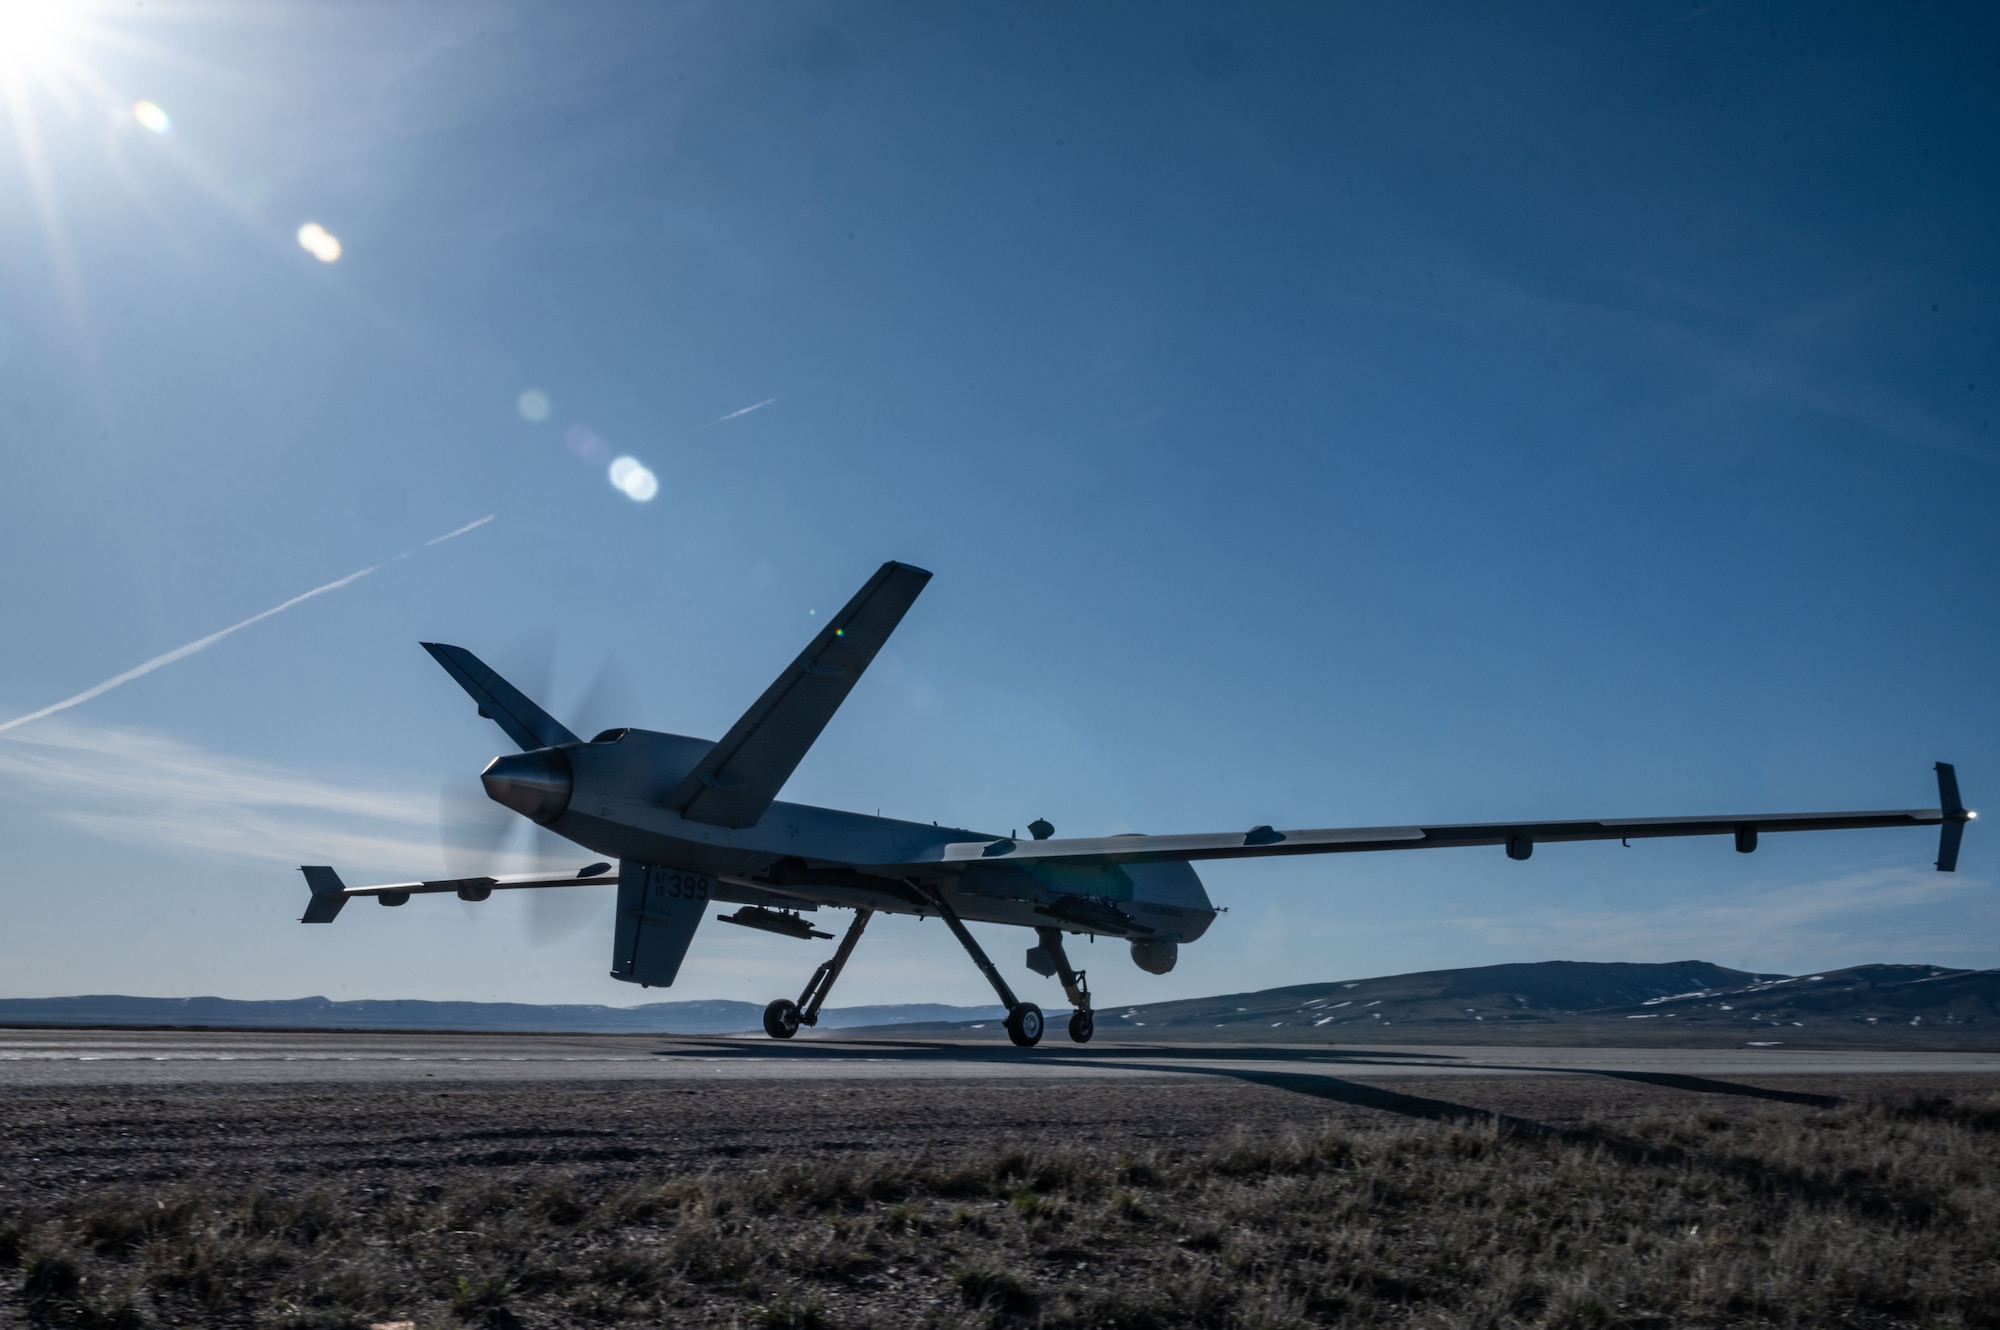 large unmanned aerial vehicle sits on road